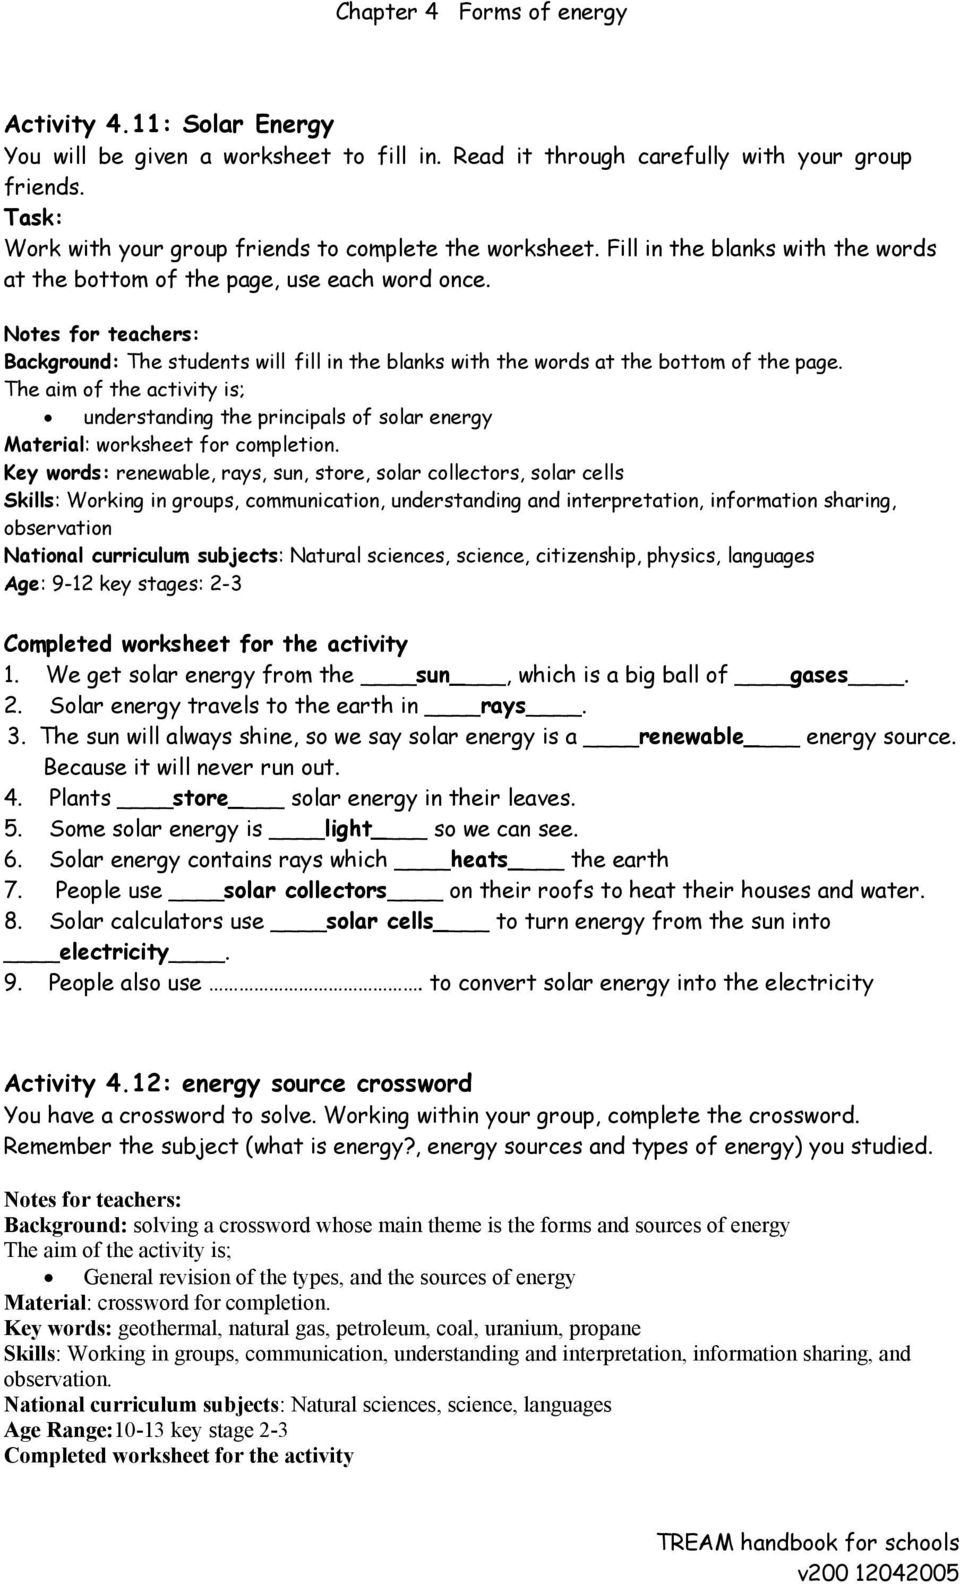 Chapter 22 Forms of energy - PDF Free Download In Introduction To Energy Worksheet Answers